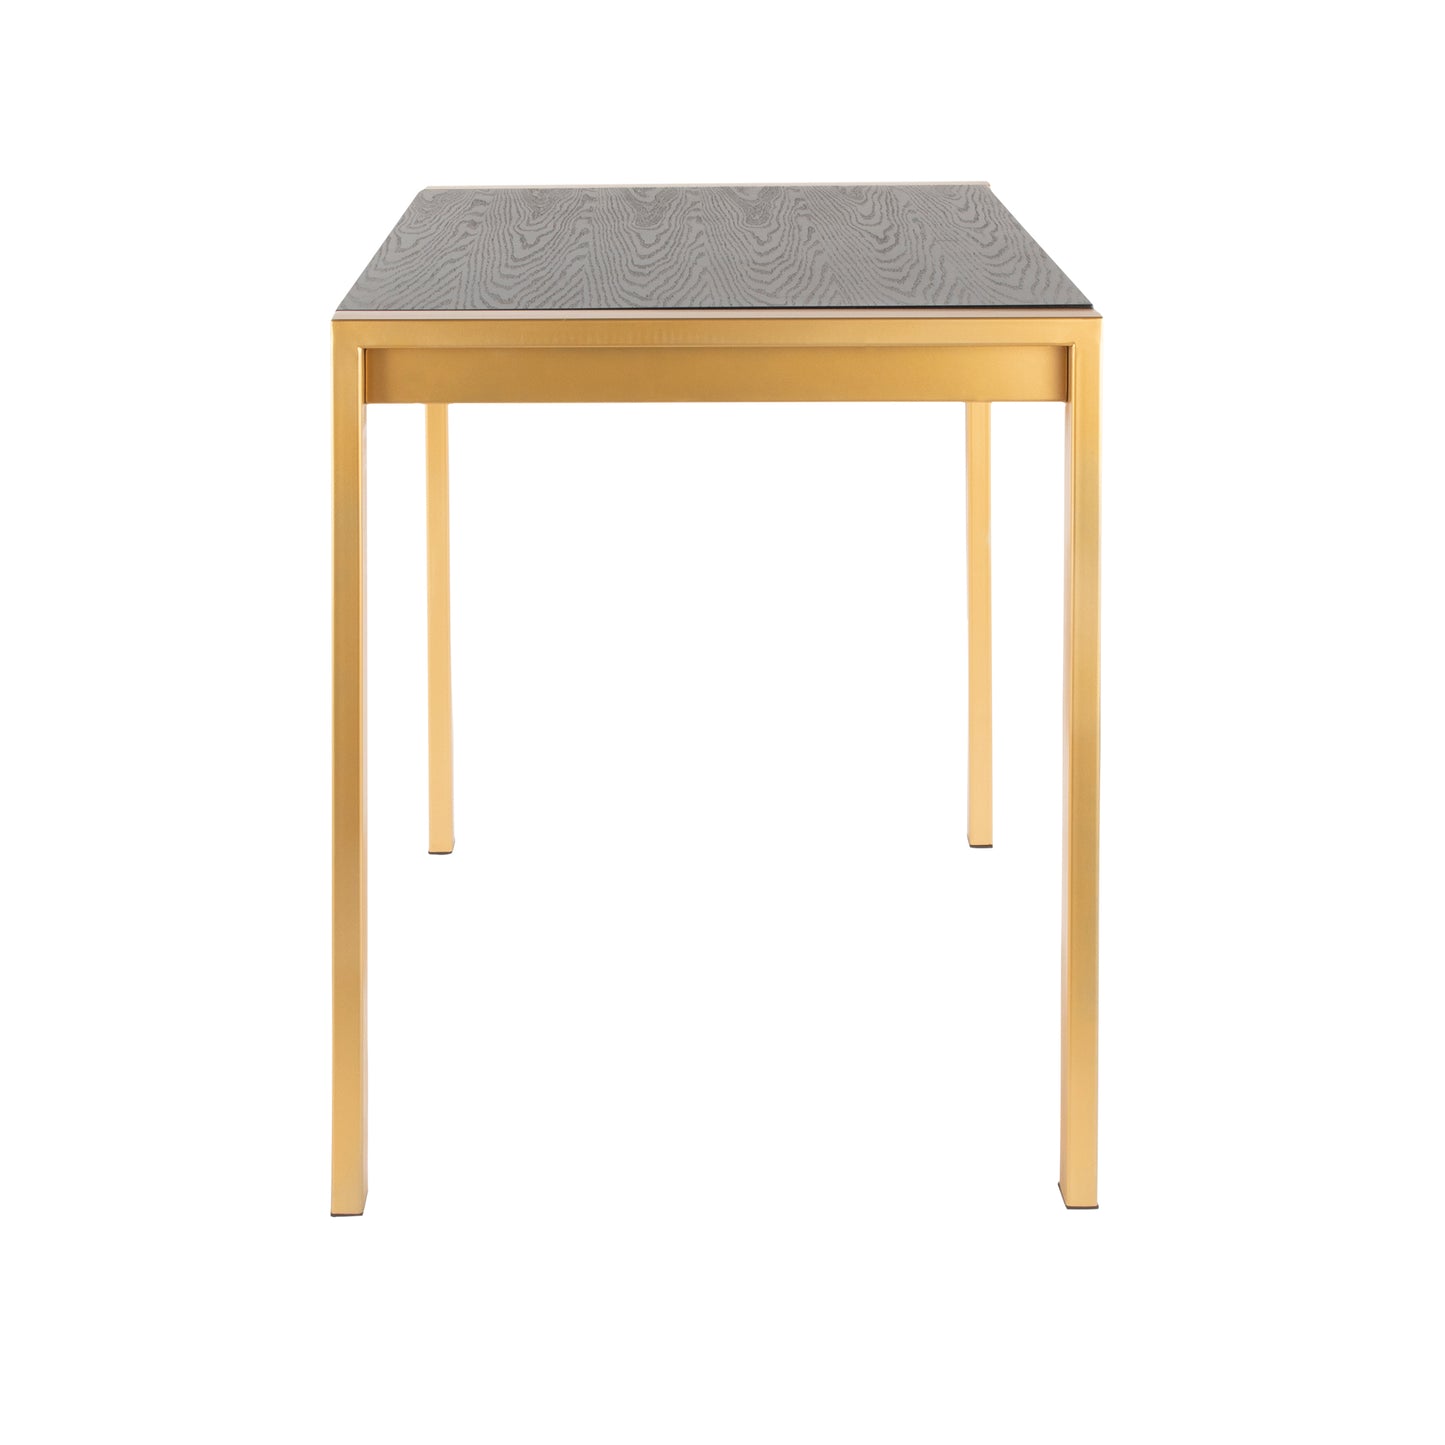 Fuji Contemporary Counter Table in Gold Metal and Black Wood Grain Top by Lumisource